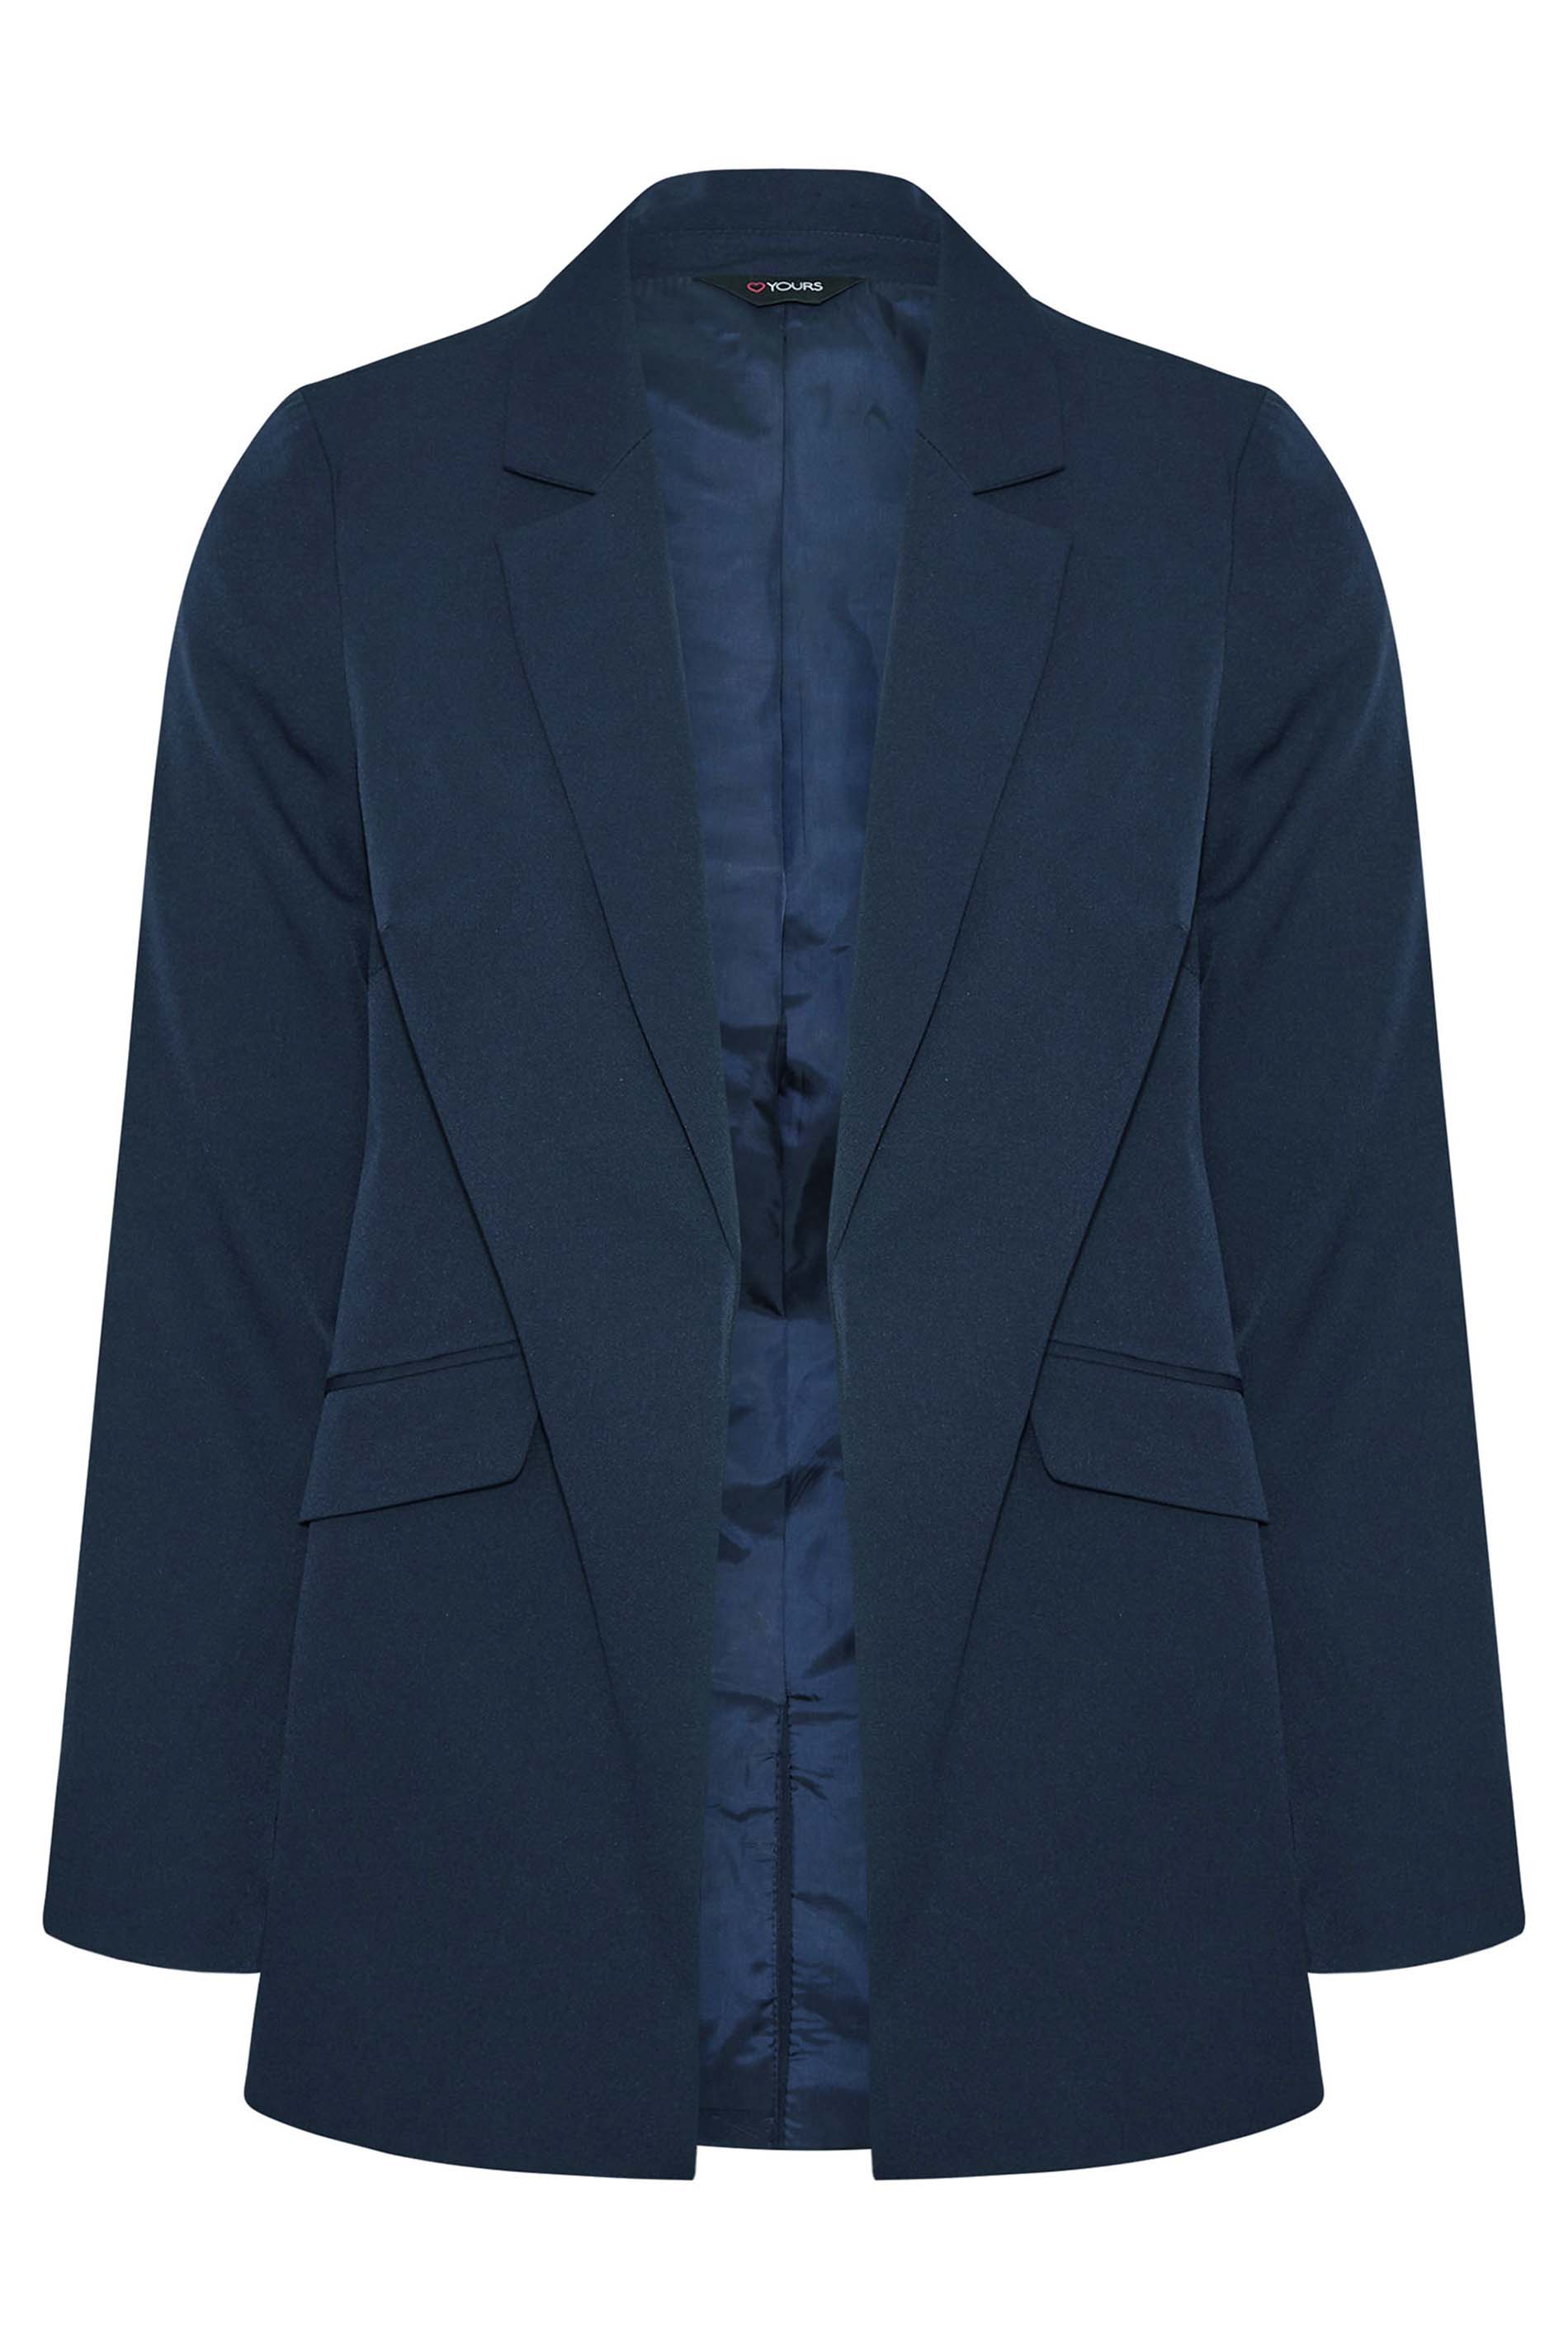 Plus Size Navy Blue Lined Blazer | Yours Clothing